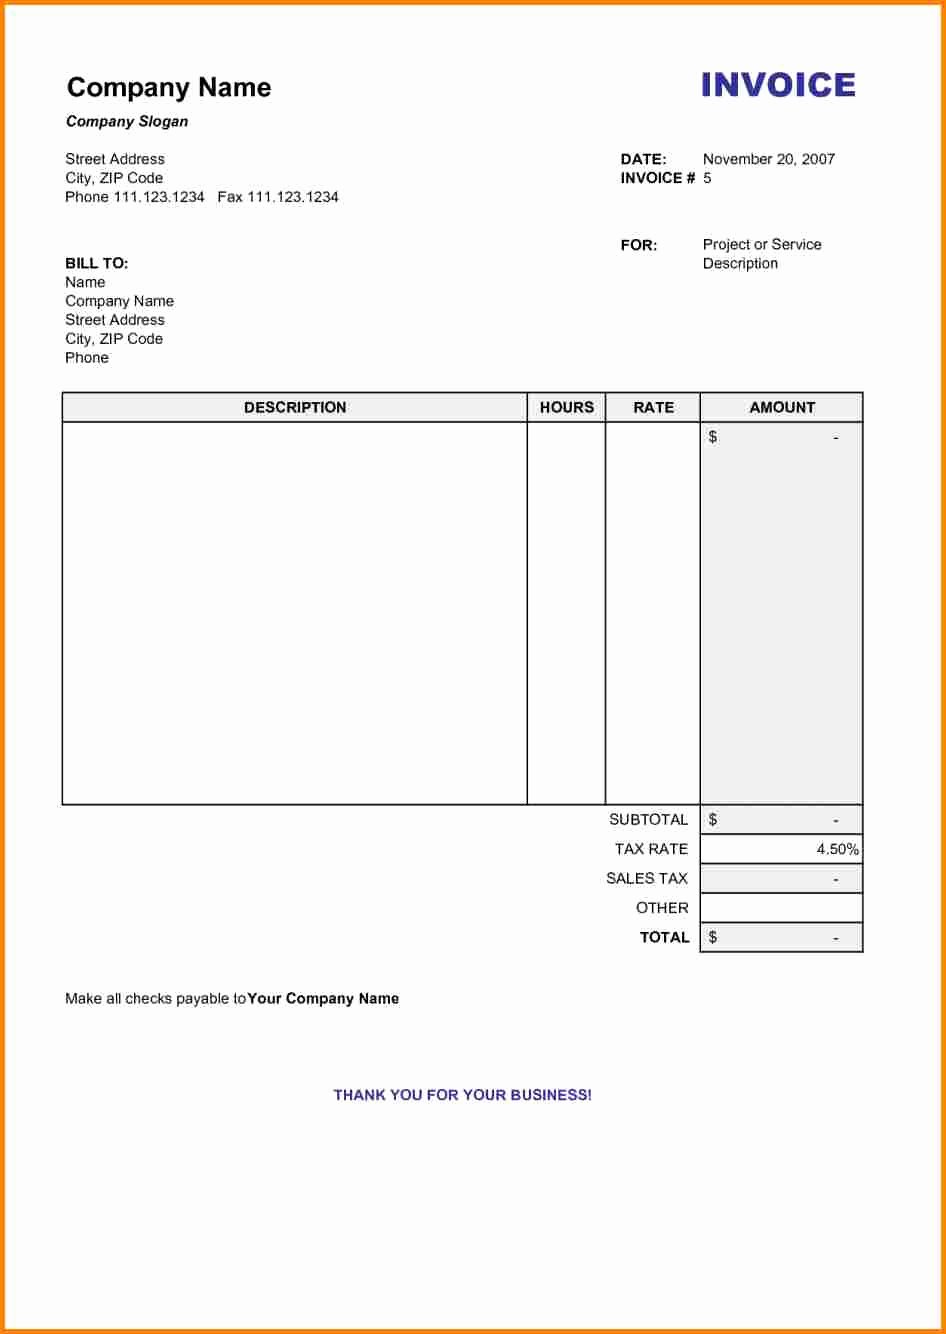 Standard Bill Of Lading Luxury Bill Of Lading forms Templates In Word and Pdf Excel